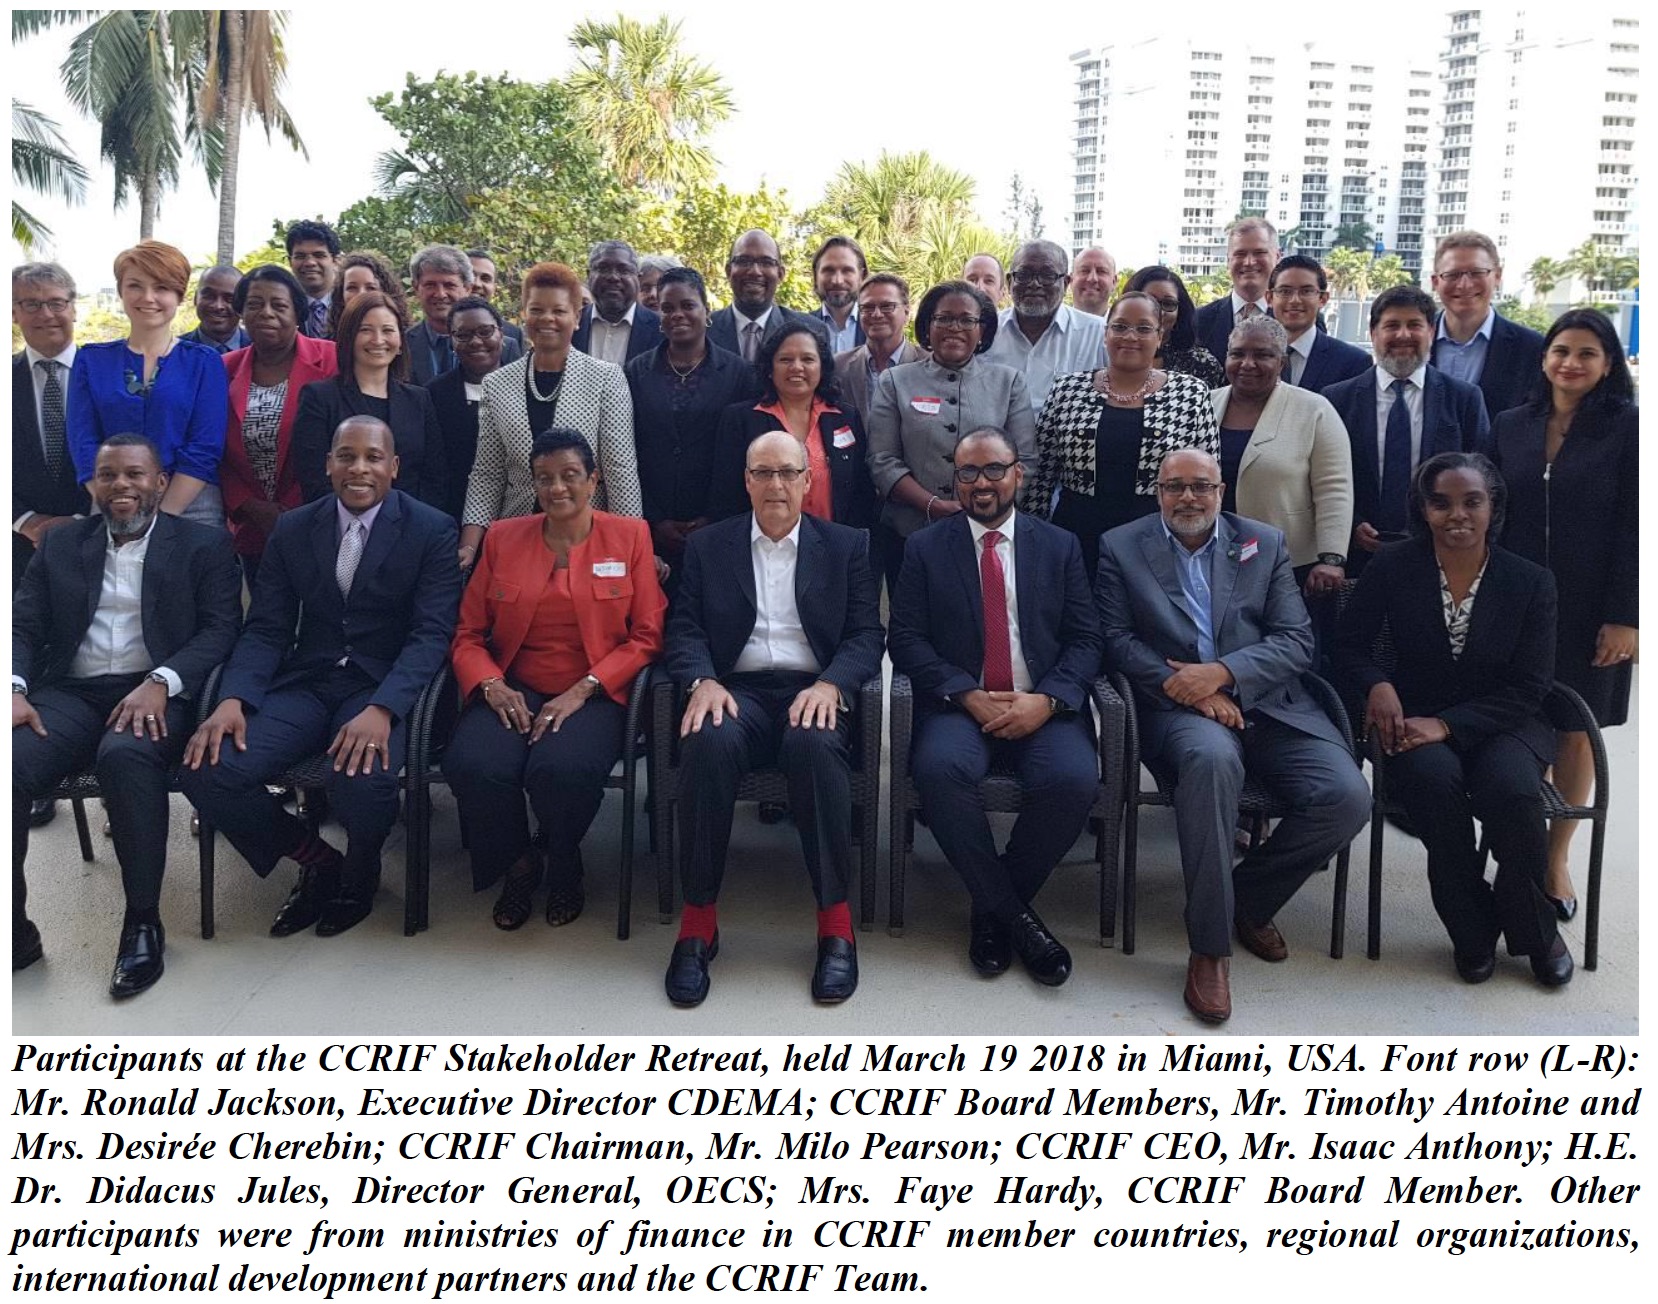 Participants at the CCRIF Stakeholder Retreat, held March 19 2018 in Miami, USA.